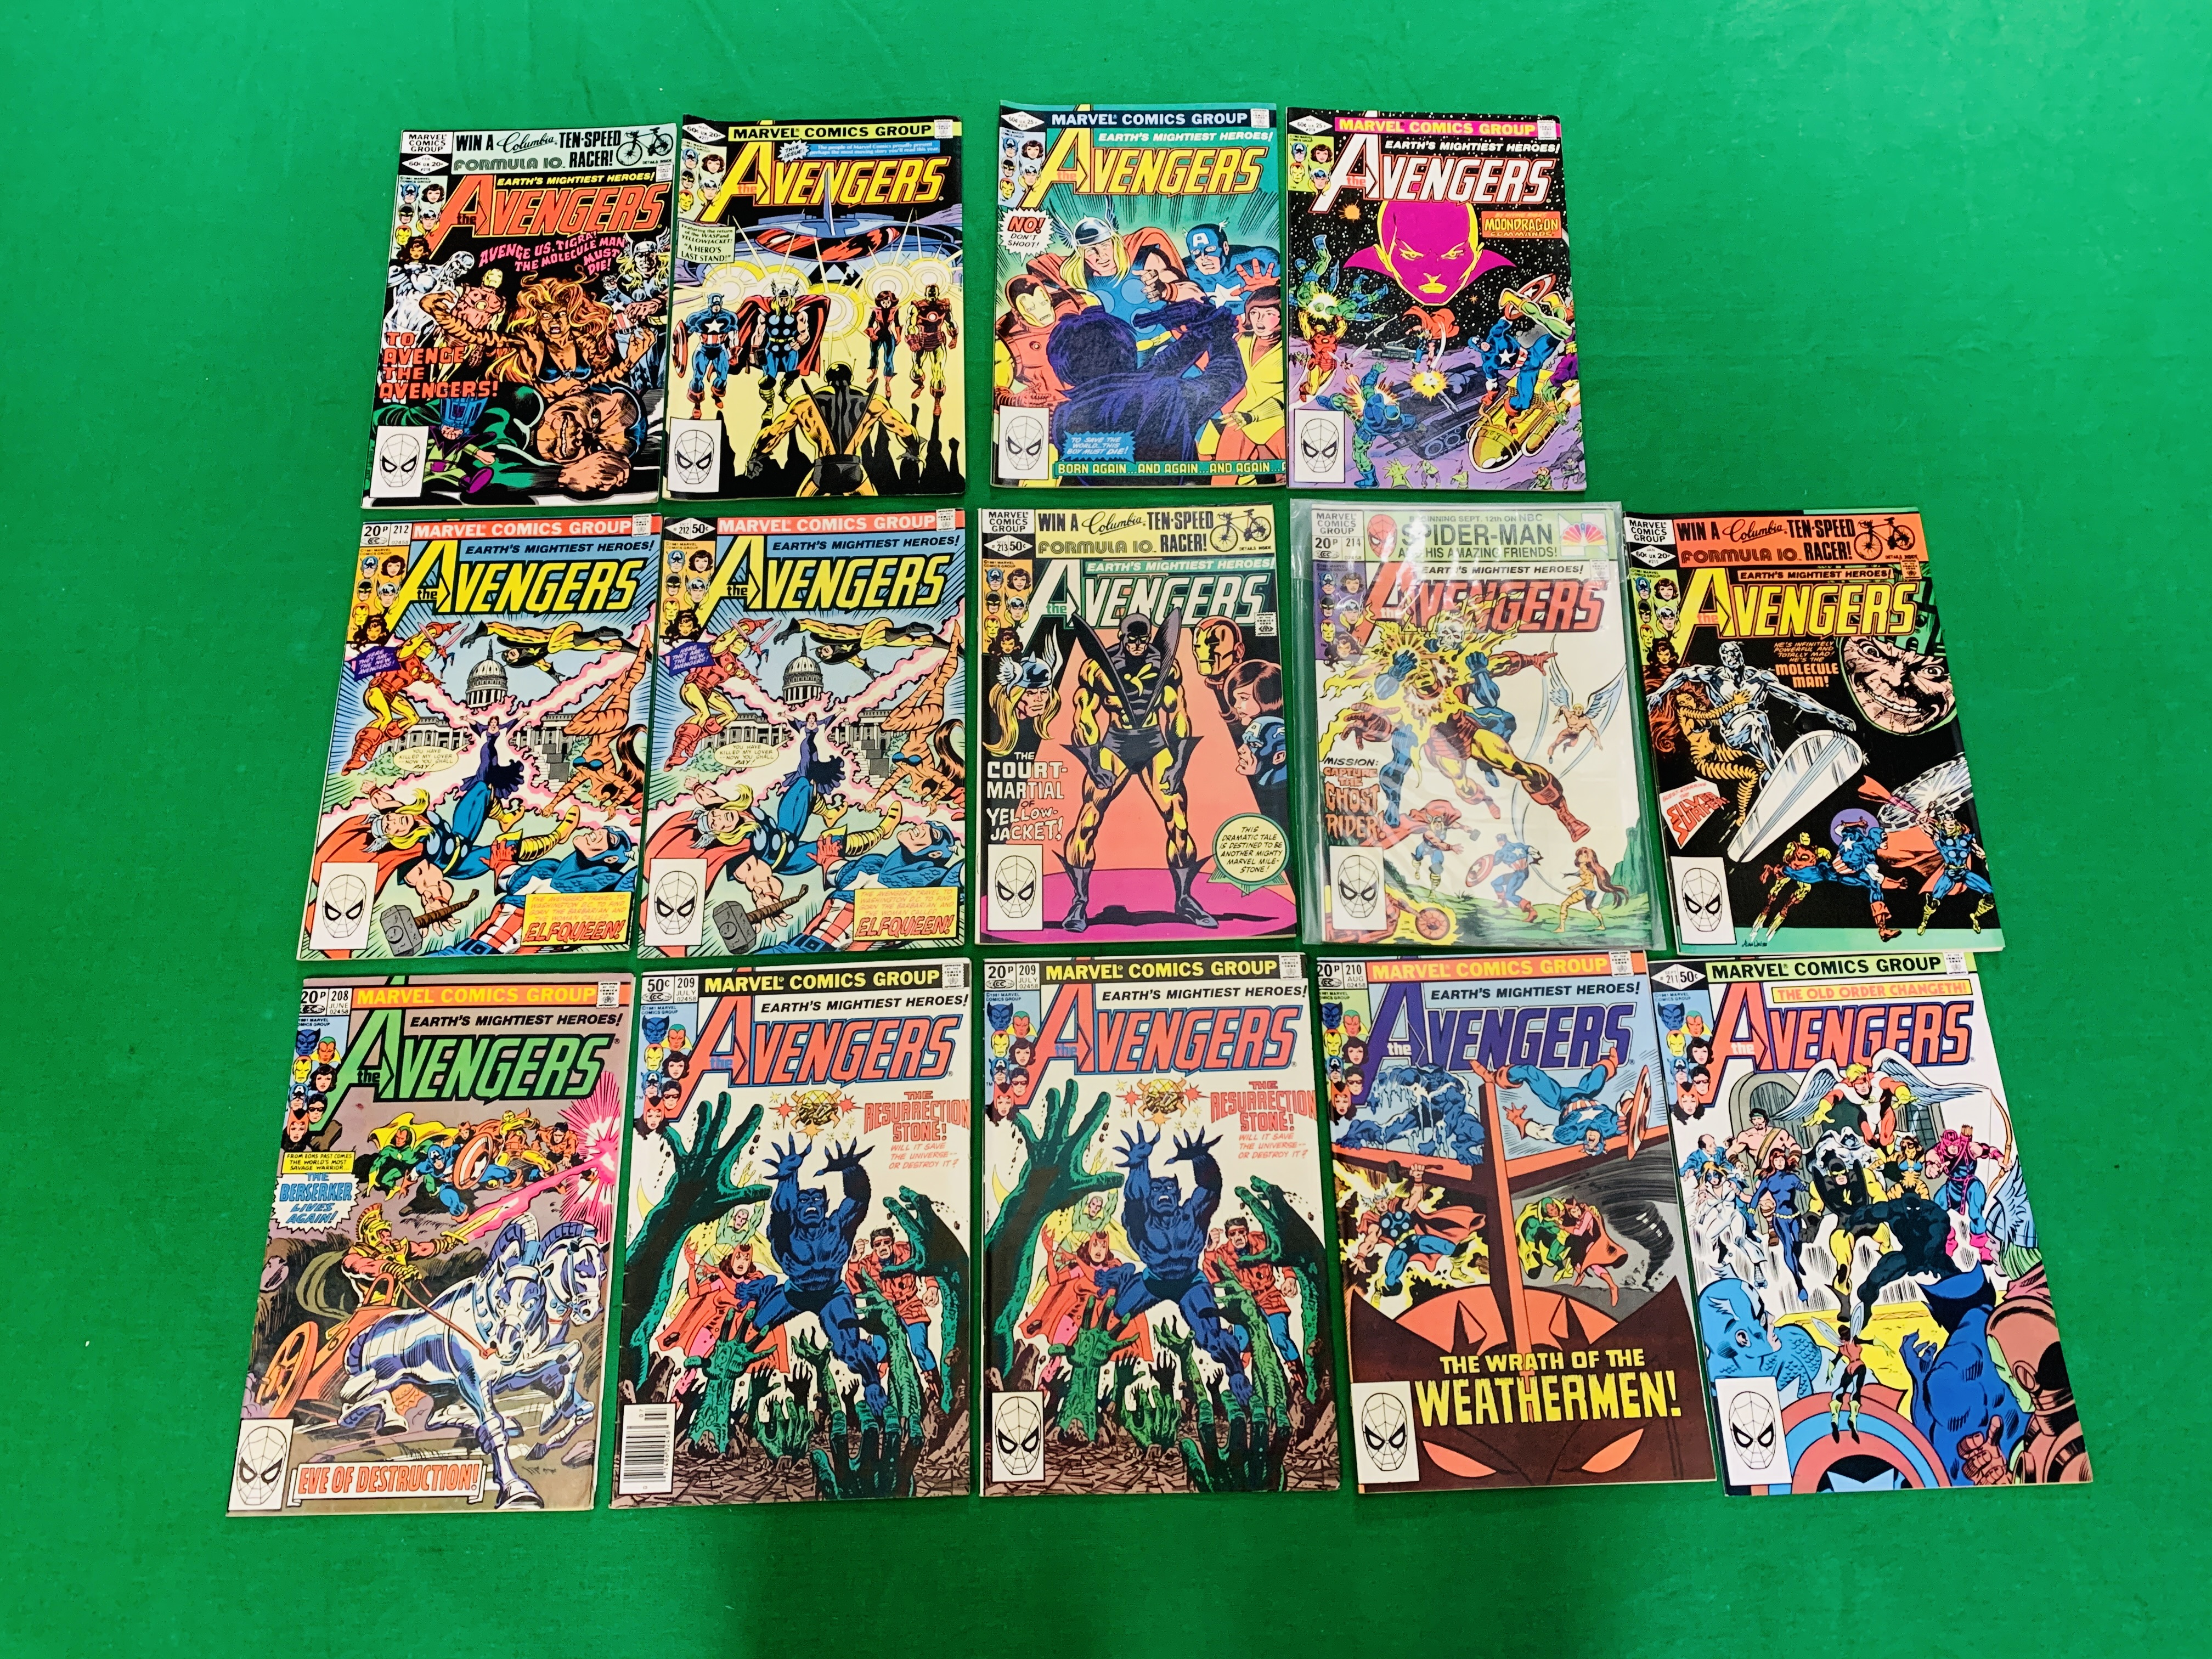 MARVEL COMICS THE AVENGERS NO. 101 - 299, MISSING ISSUES 103 AND 110. - Image 77 of 130